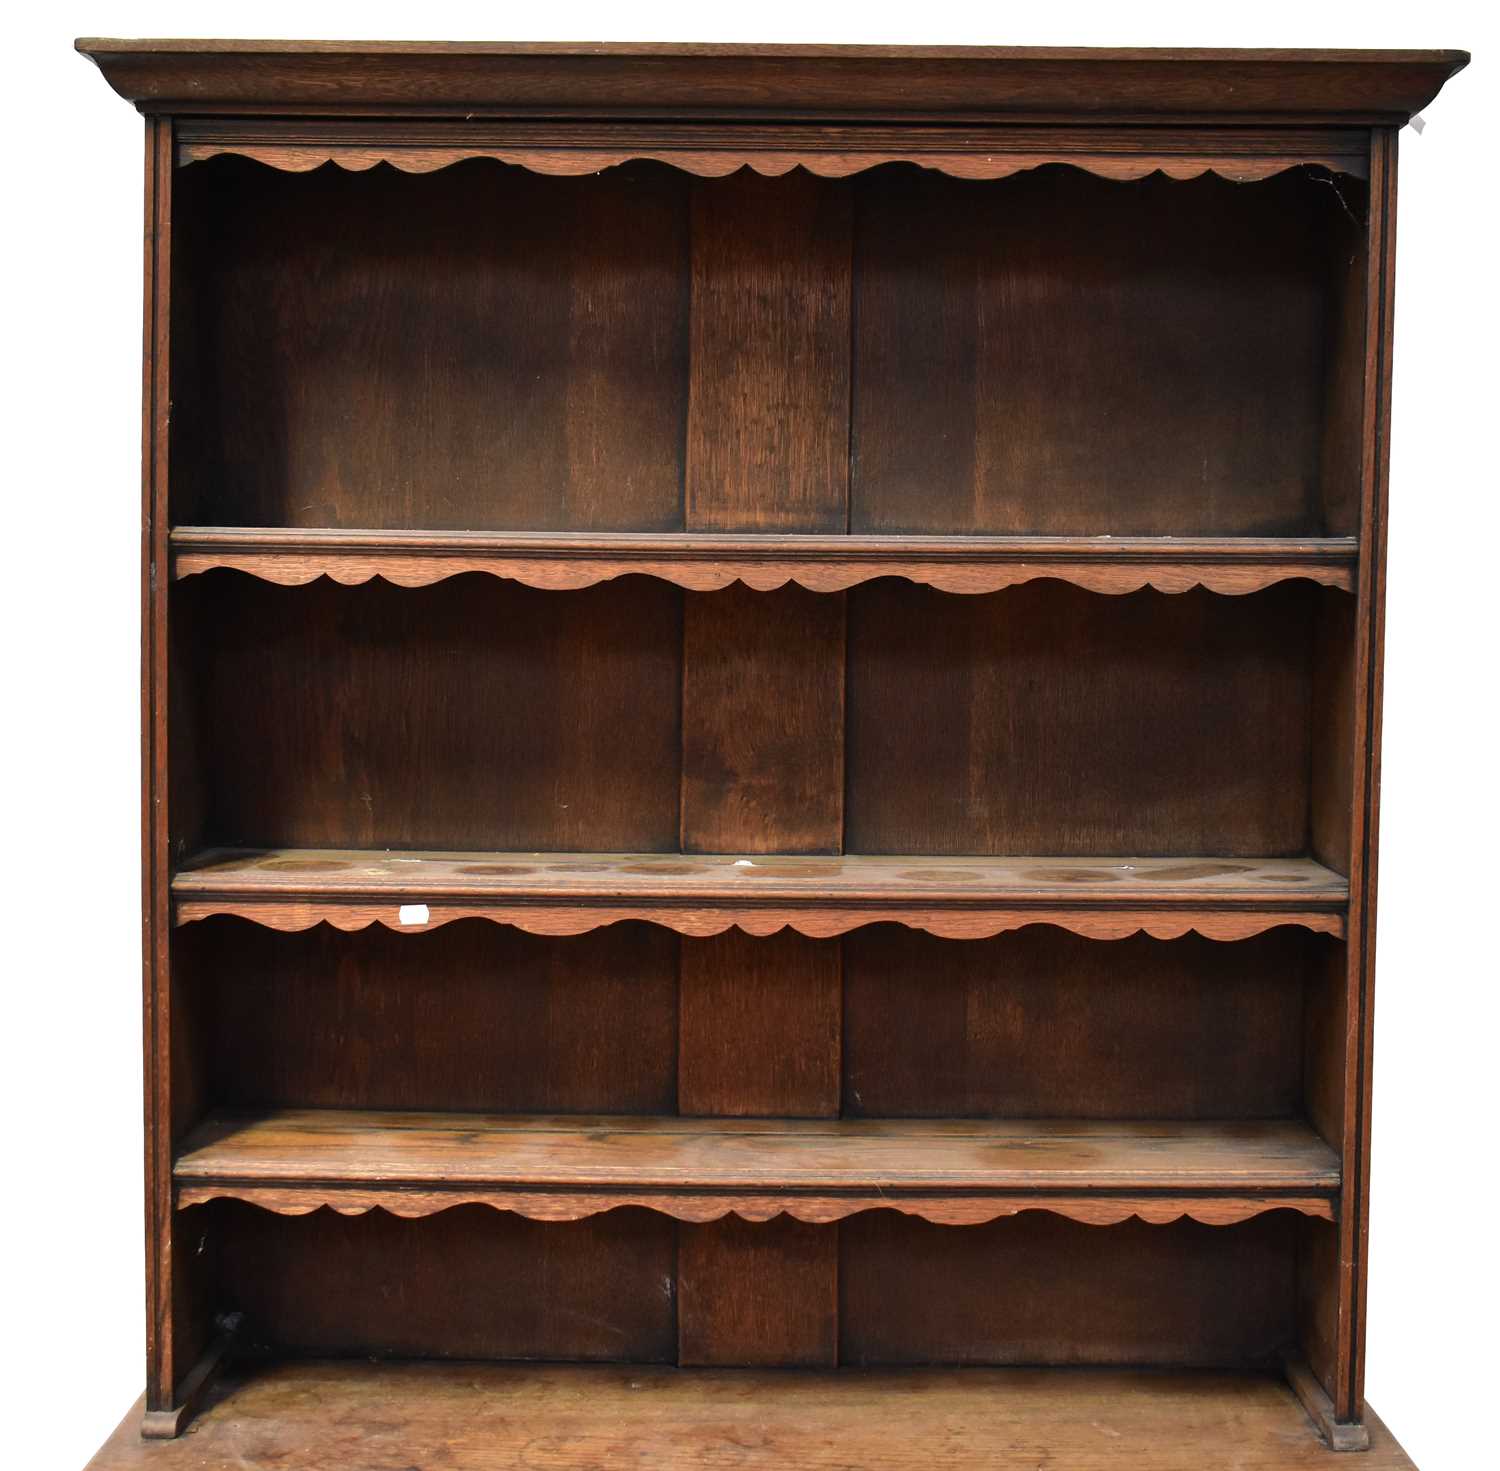 An early 20th century carved oak dresser with enclosed plate rack of three shelves, above a base - Image 3 of 3